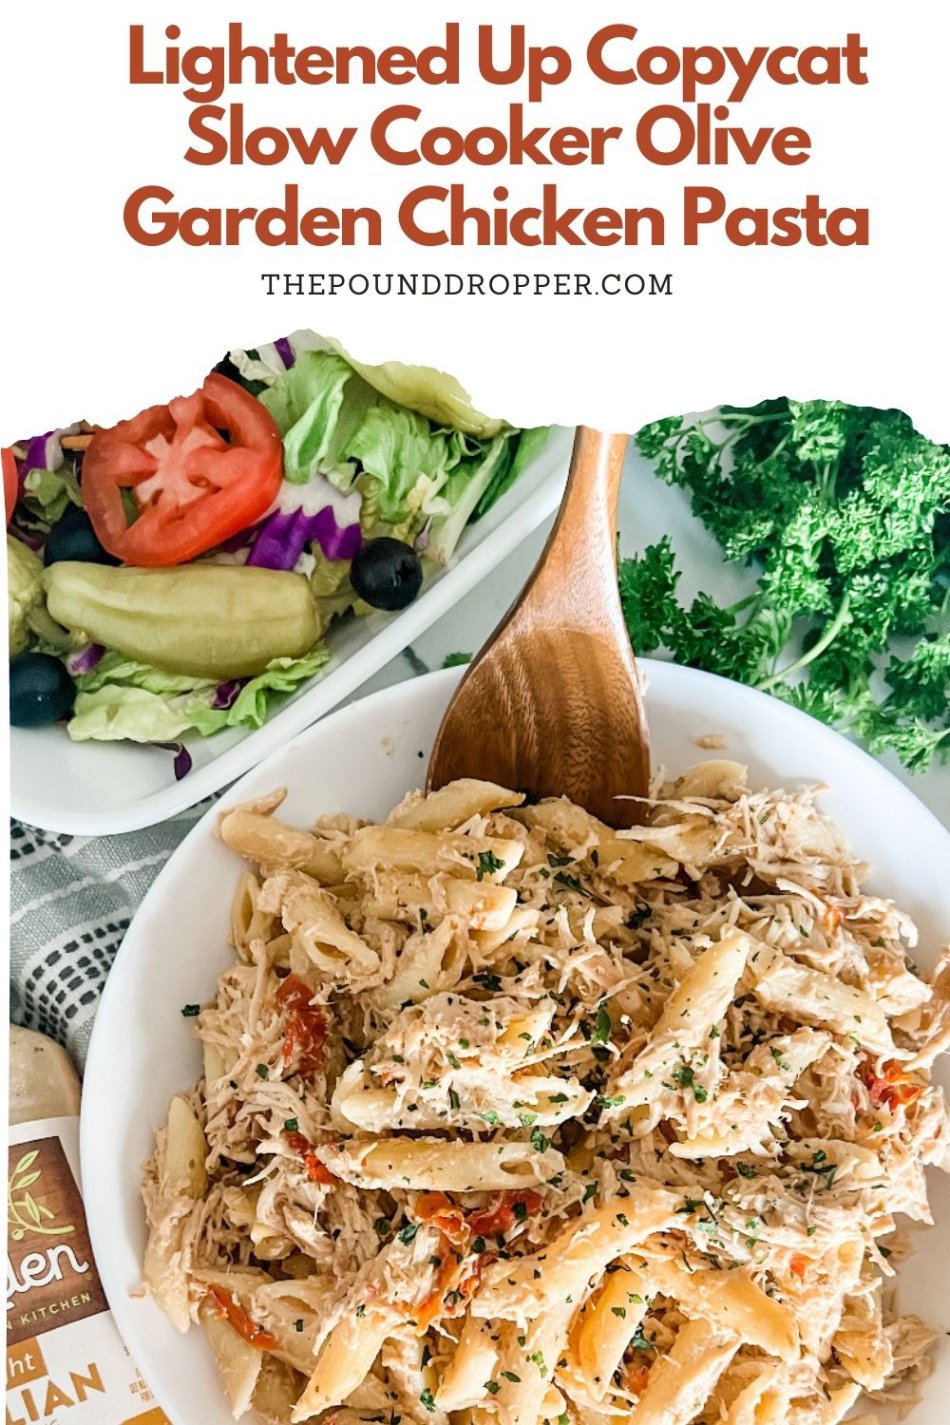 This Lightened Up Copycat Slow Cooker Olive Garden Chicken Pasta is a delicious and easy weeknight dinner that the entire family will love. Made with 6 simple ingredients. Just throw chicken breast, sun dried tomatoes, Italian dressing, Parmesan cheese and light cream cheese into a slow cooker-and in just a few hours-you have yourself a tasty meal!  Serve with a salad and garlic bread for a complete meal.  via @pounddropper